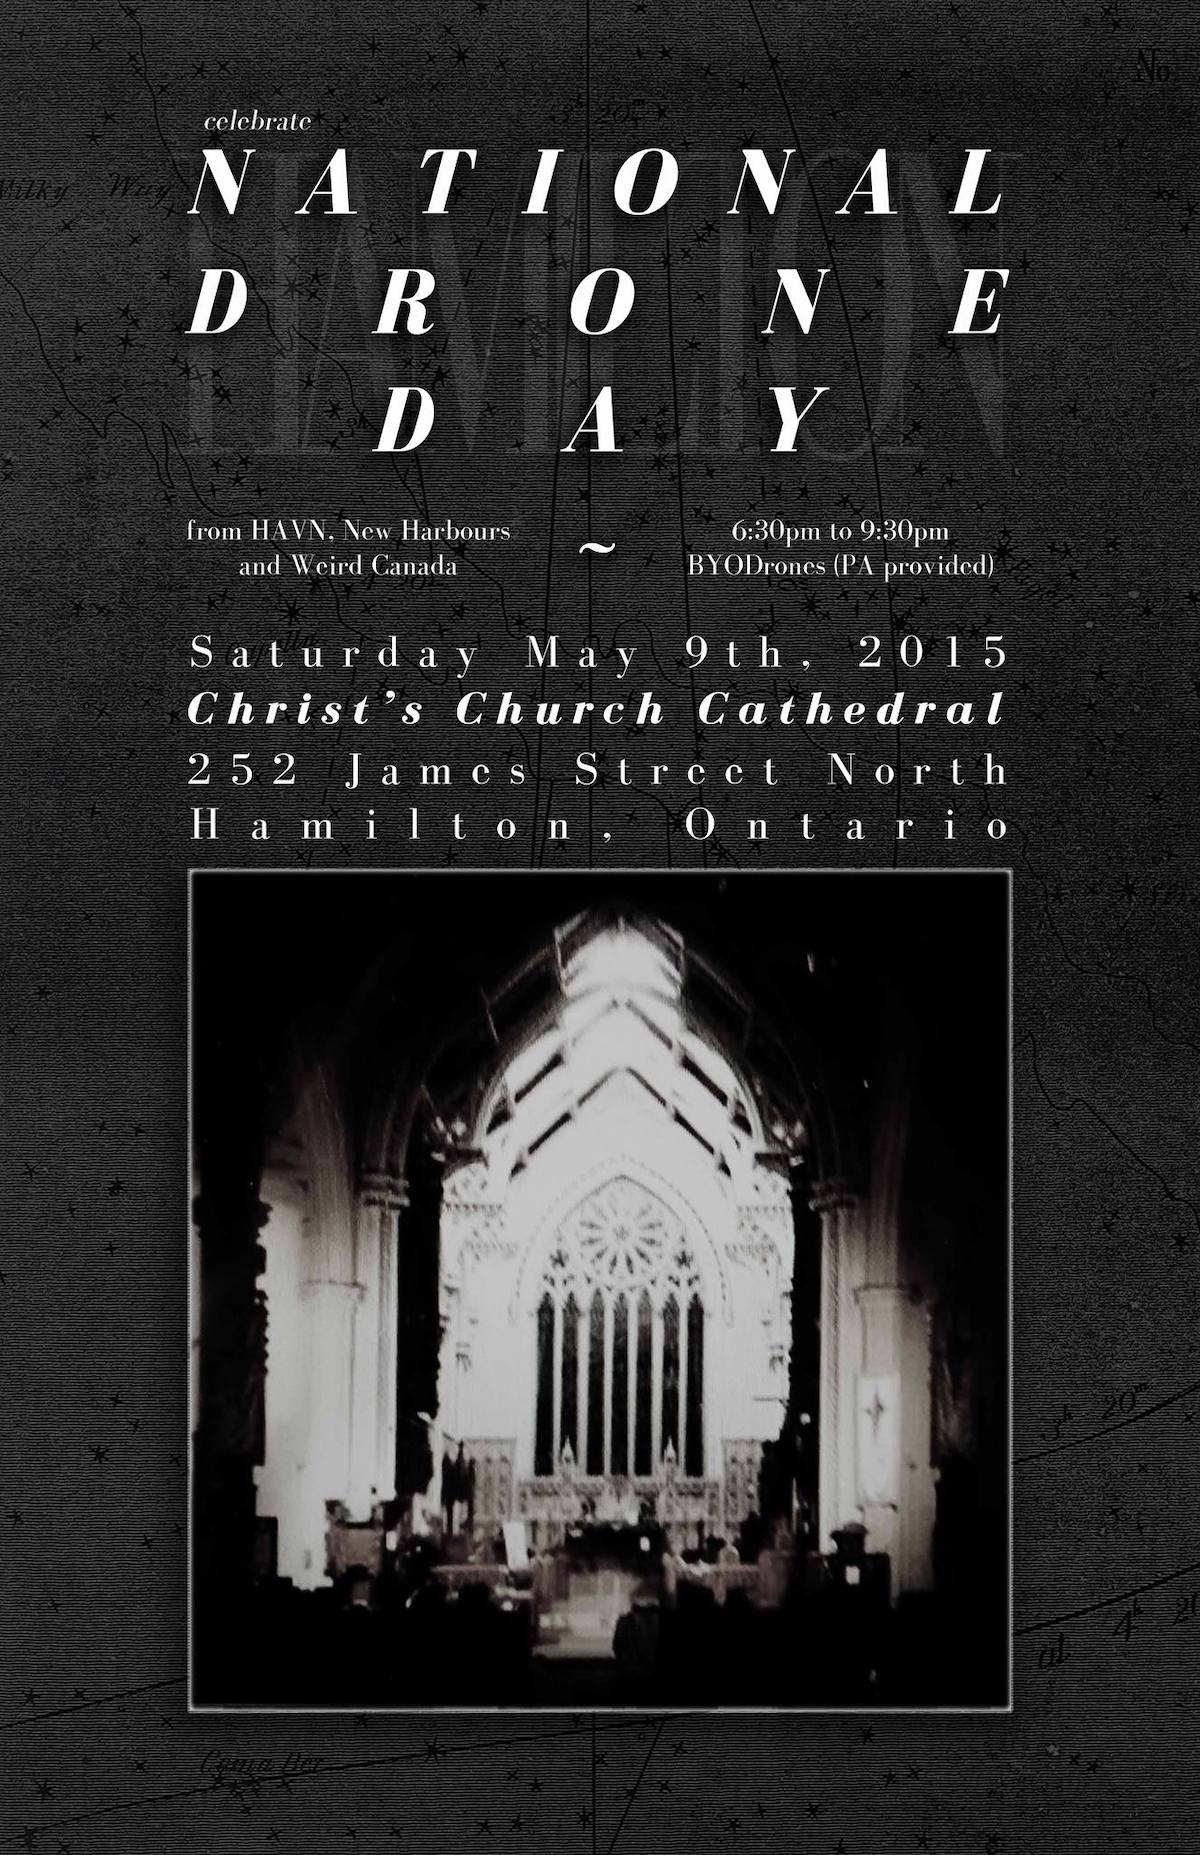 Grey background with a vintage photo of a Cathedral in the center